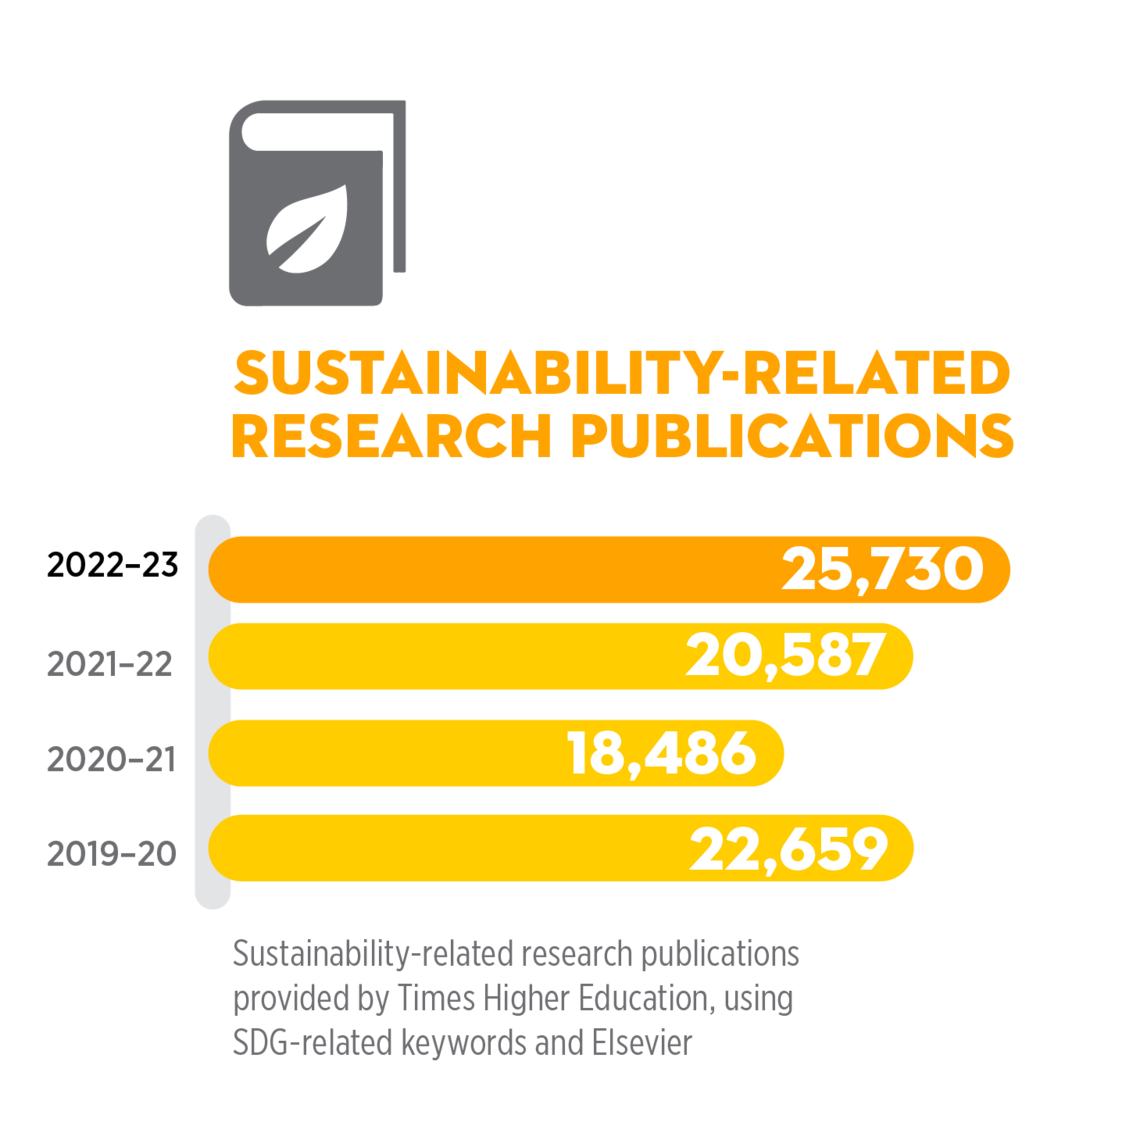 Sustainability-related research publications 4-year trend data